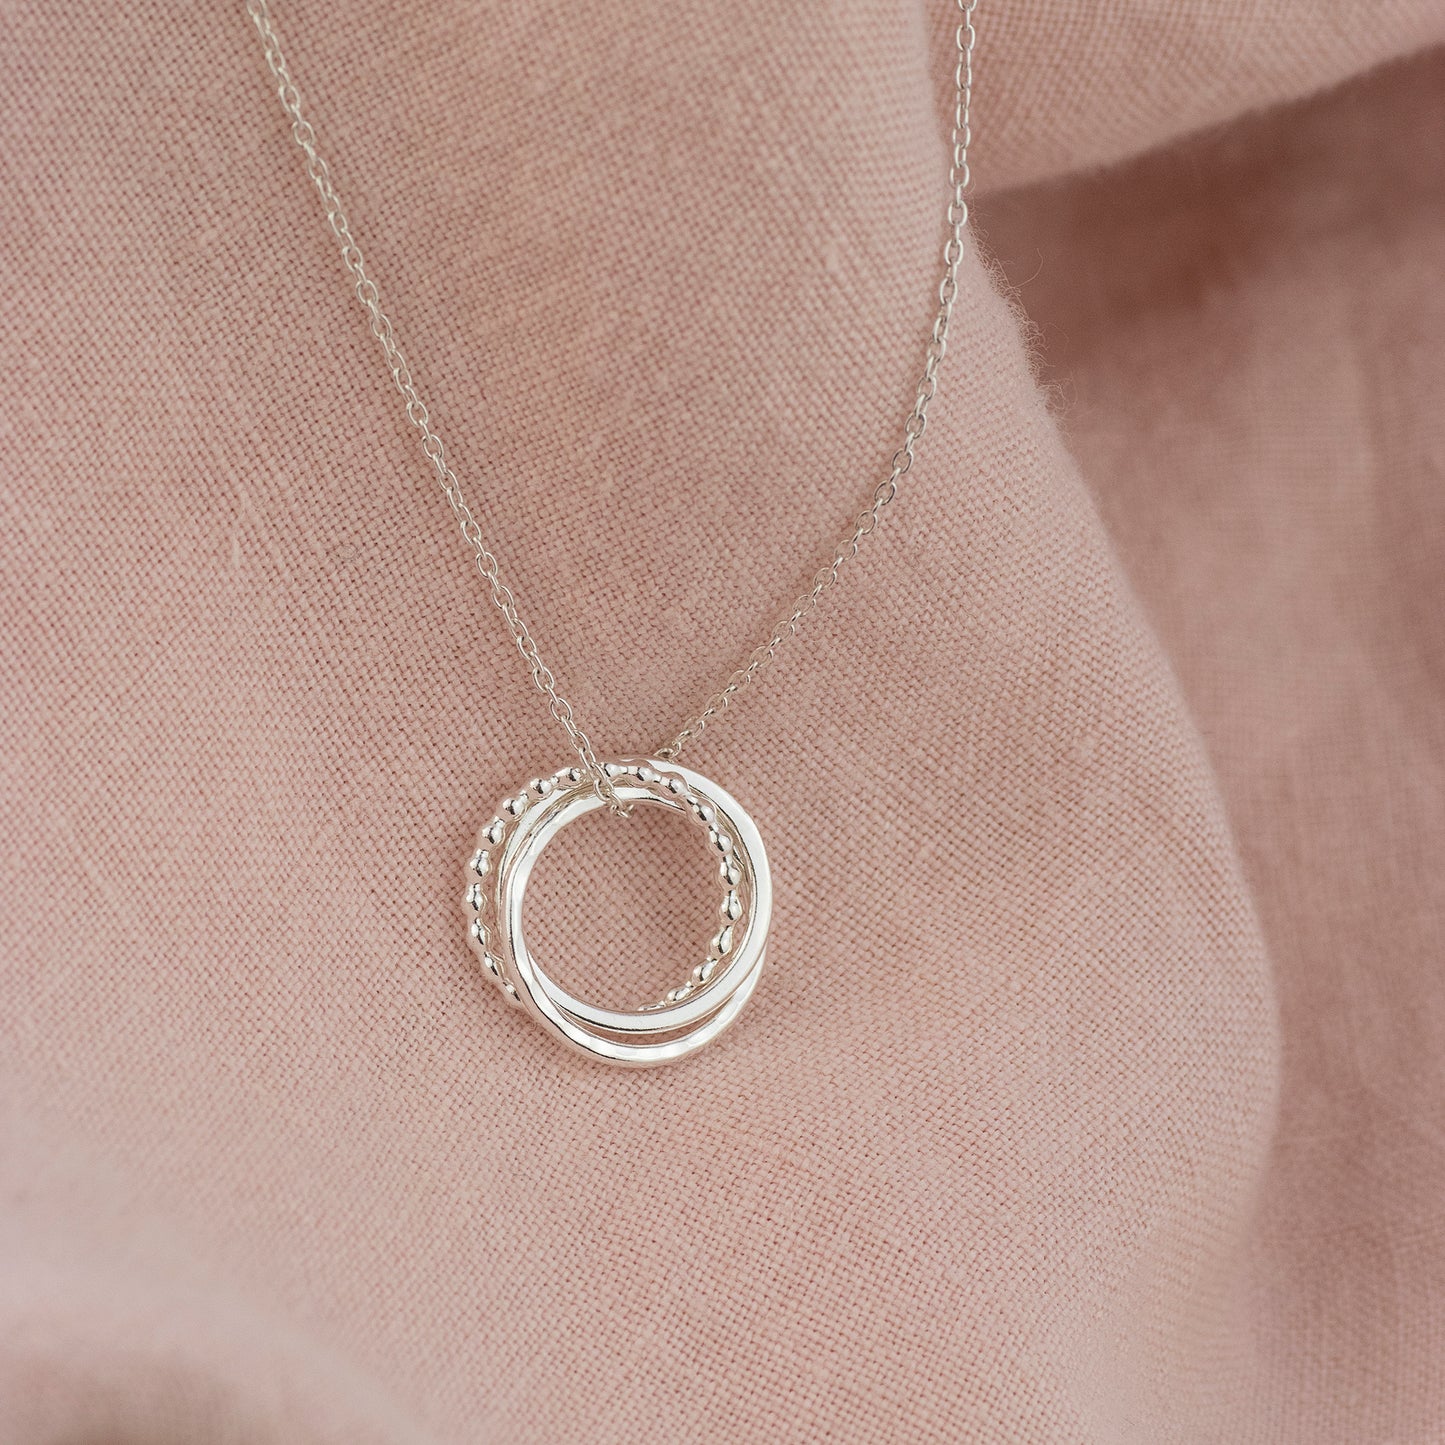 3rd Anniversary Necklace - Petite Silver - The Original 3 Rings for 3 Years Necklace